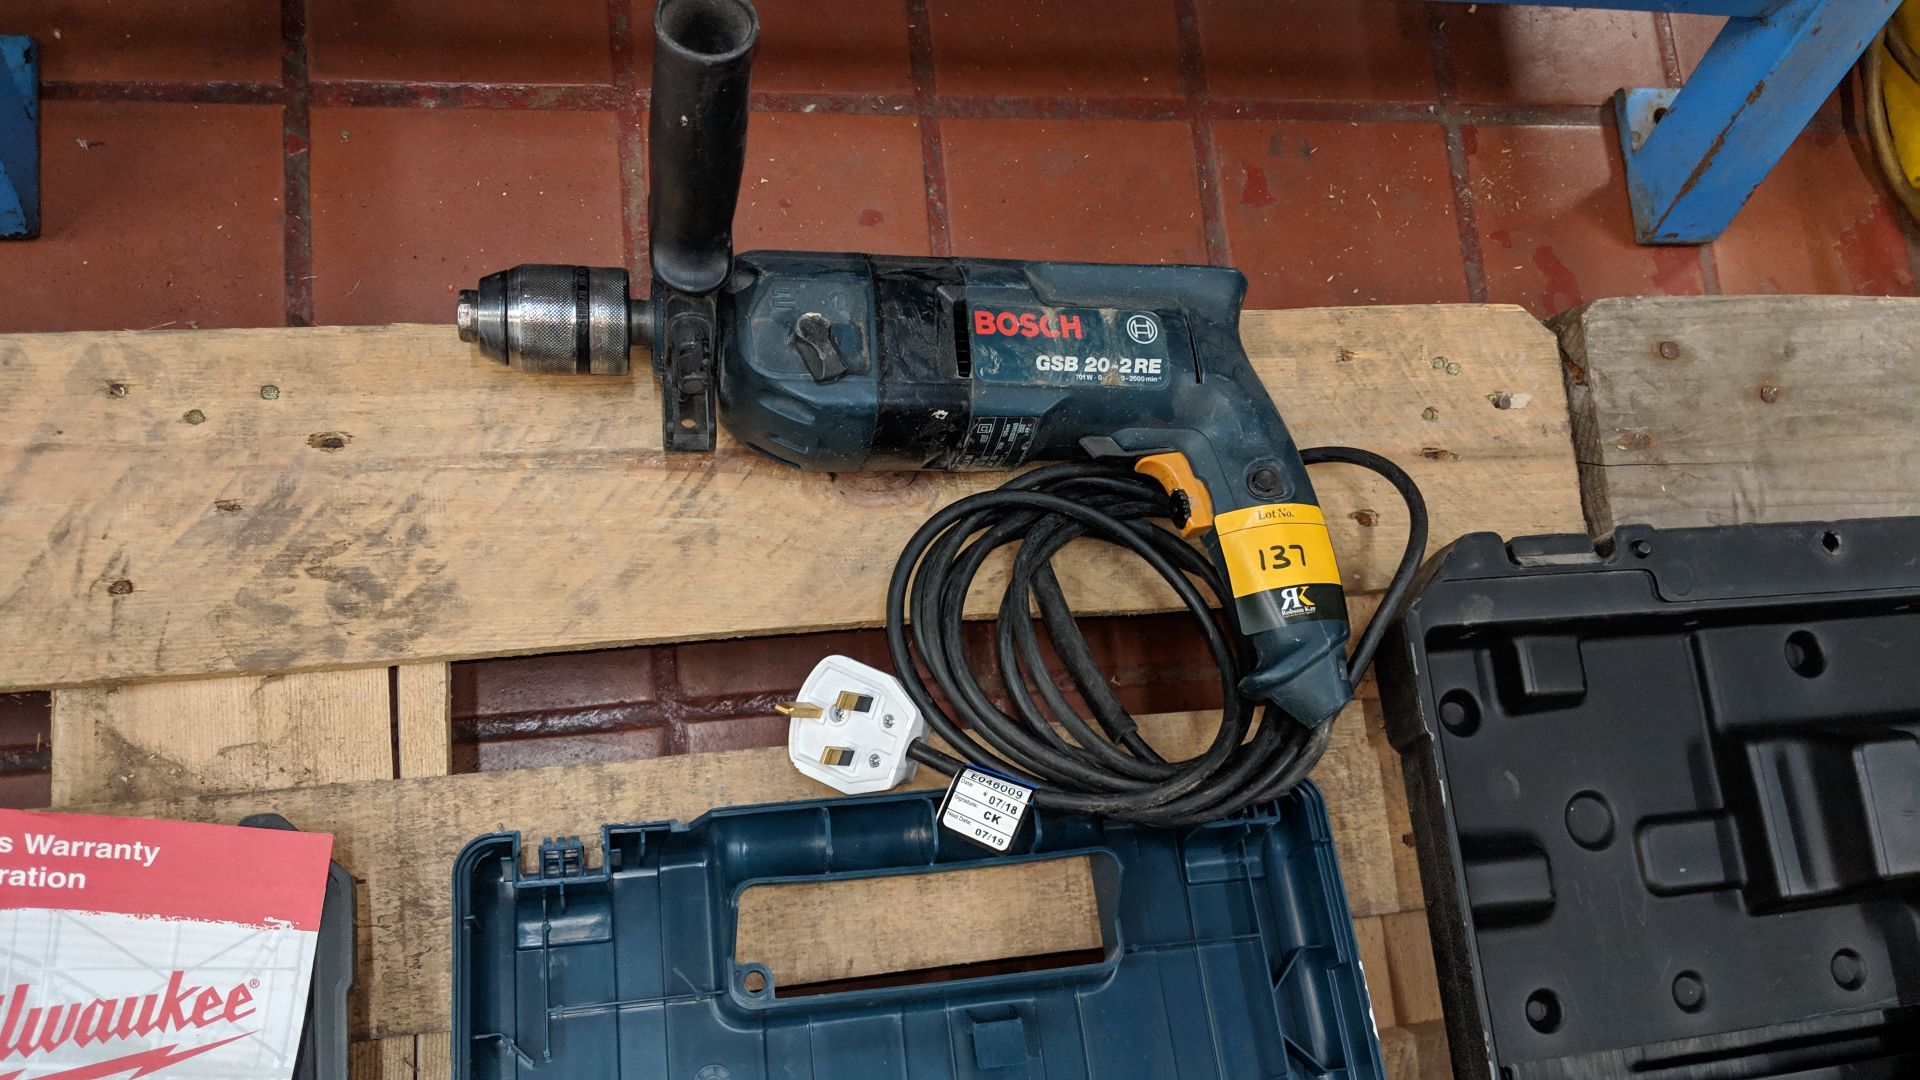 Bosch GSB 20-2RE professional corded drill This is one of a large number of lots in this sale